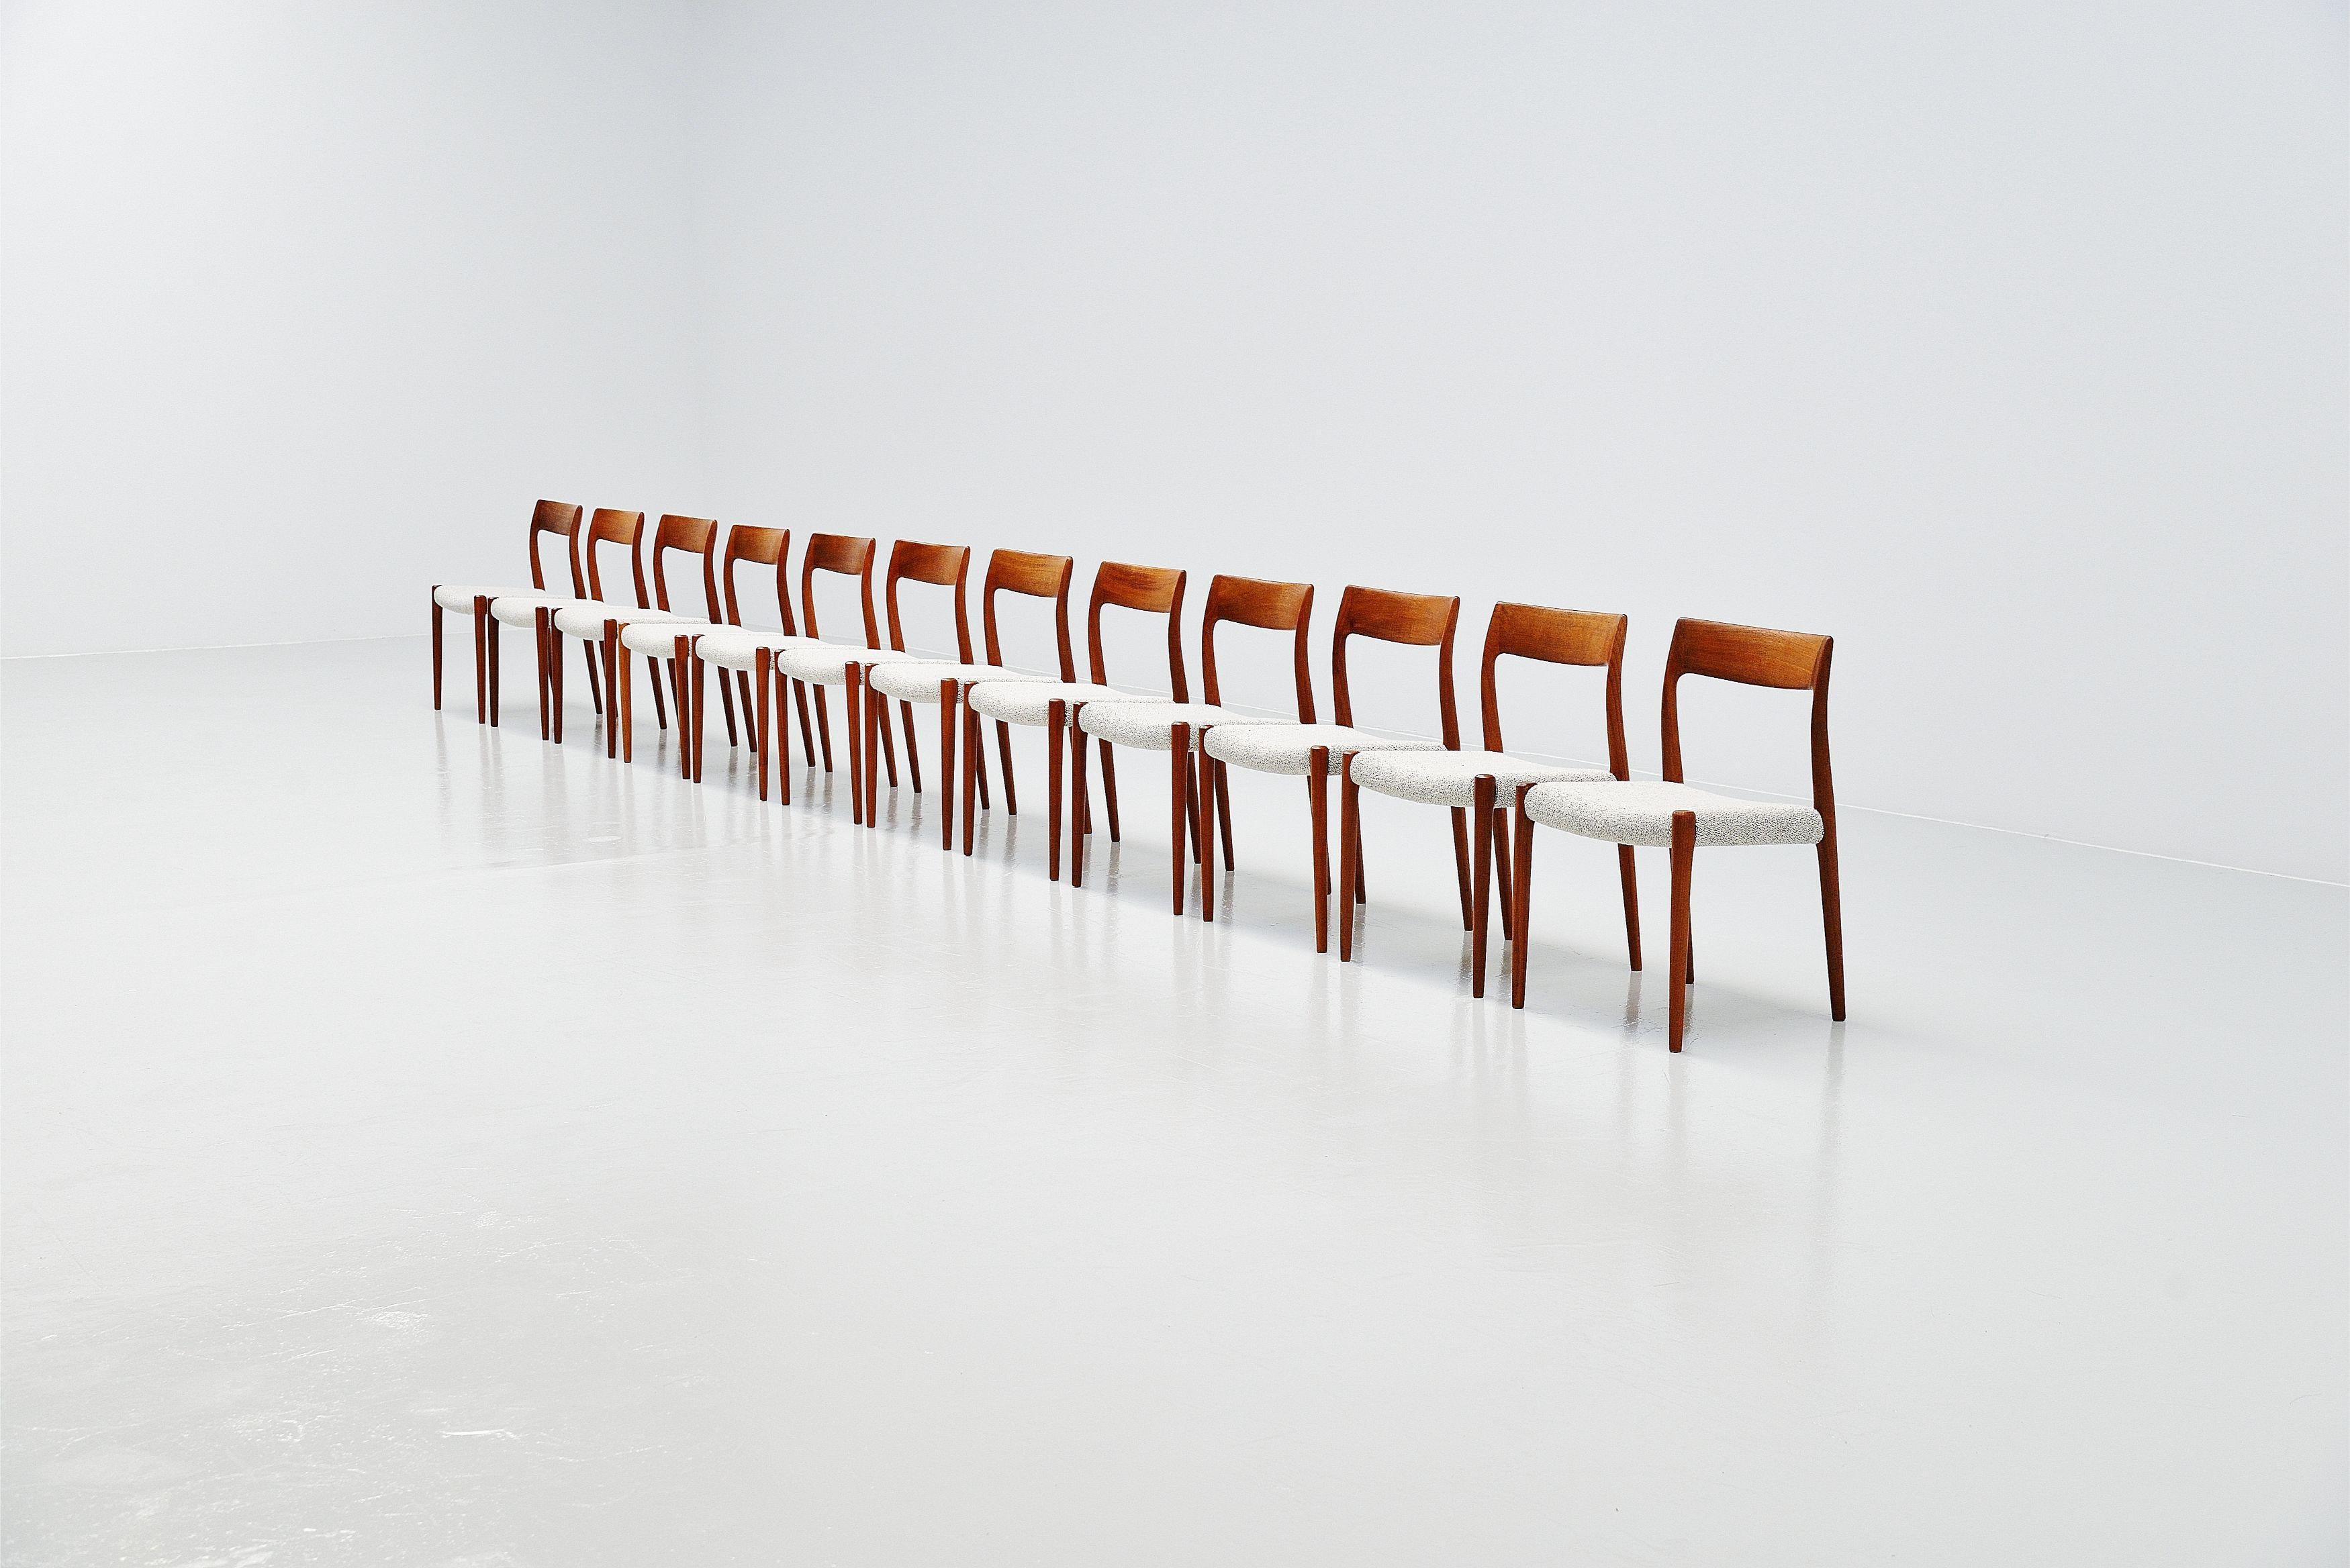 Very nice large quality set of dining chairs model 77 designed by Niels Moller and manufactured by J.L. Møller Mobelfabrik, Denmark 1959. These chairs are made of solid teak wood and have reuphlstered black and white bouclé upholstery which is a